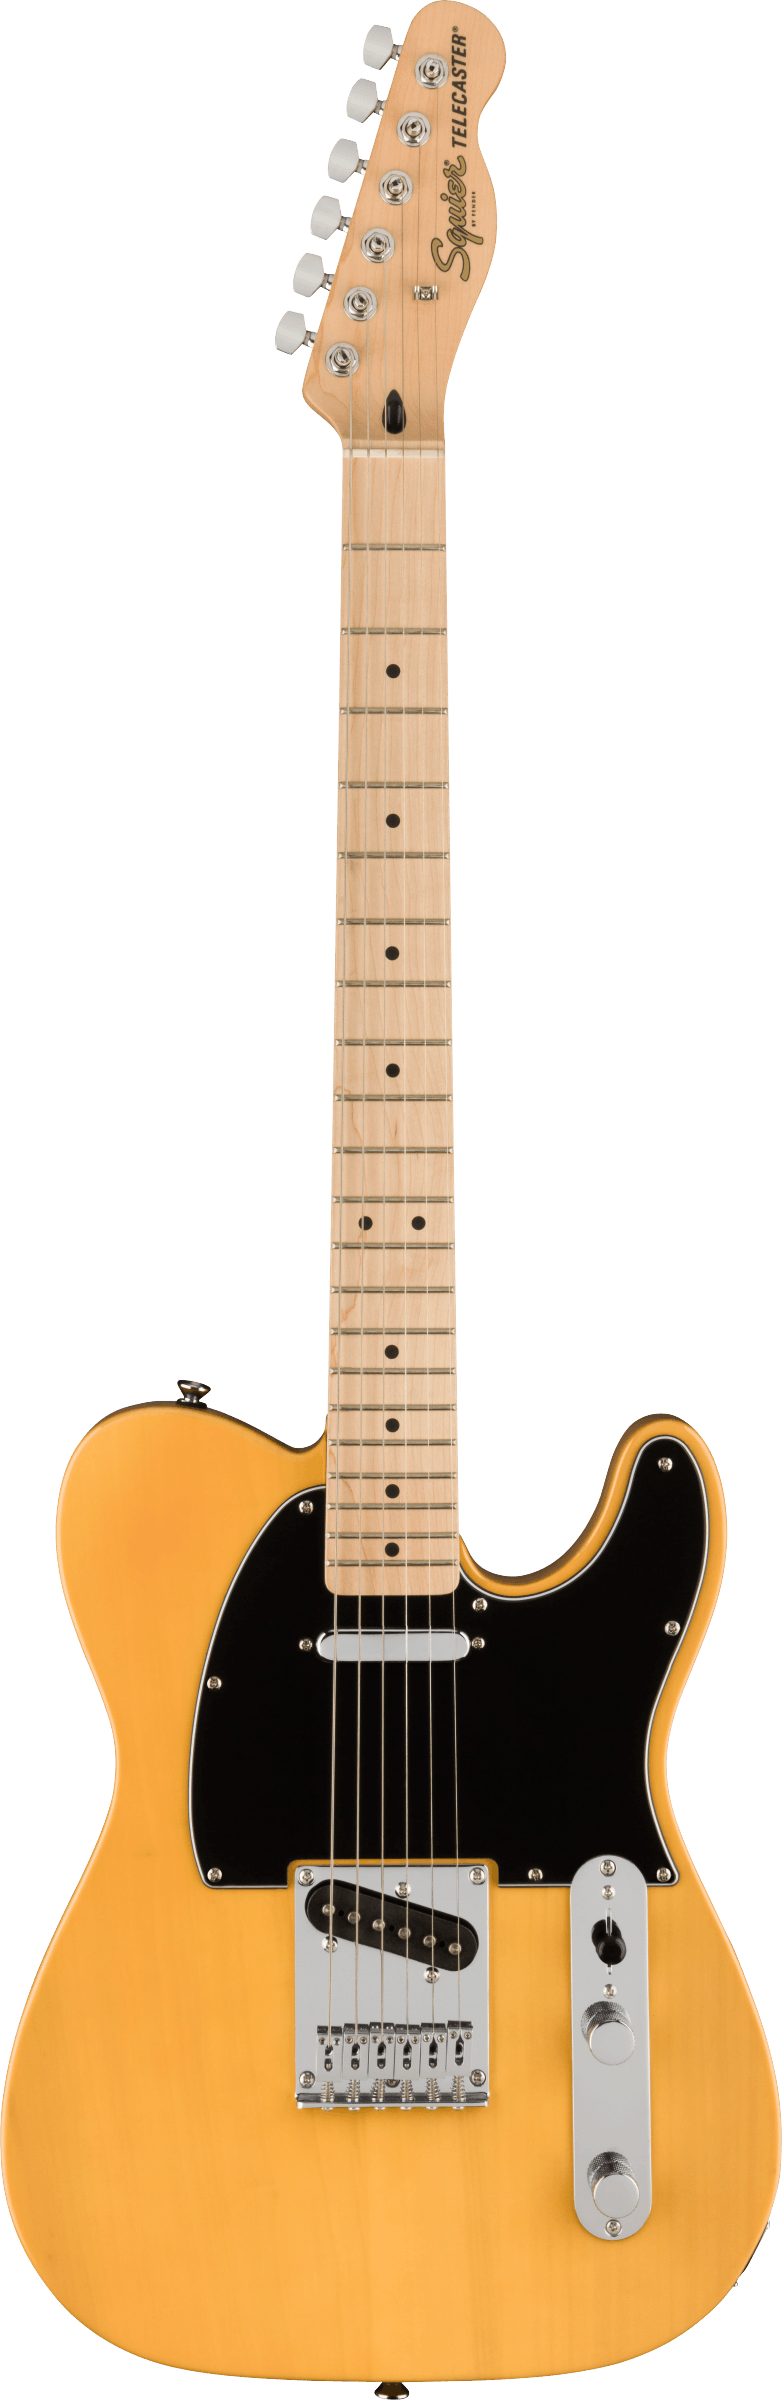 SQUIER AFFINITY TELECASTER ELECTRIC GUITAR - BUTTERSCOTCH BROWN - Joondalup Music Centre